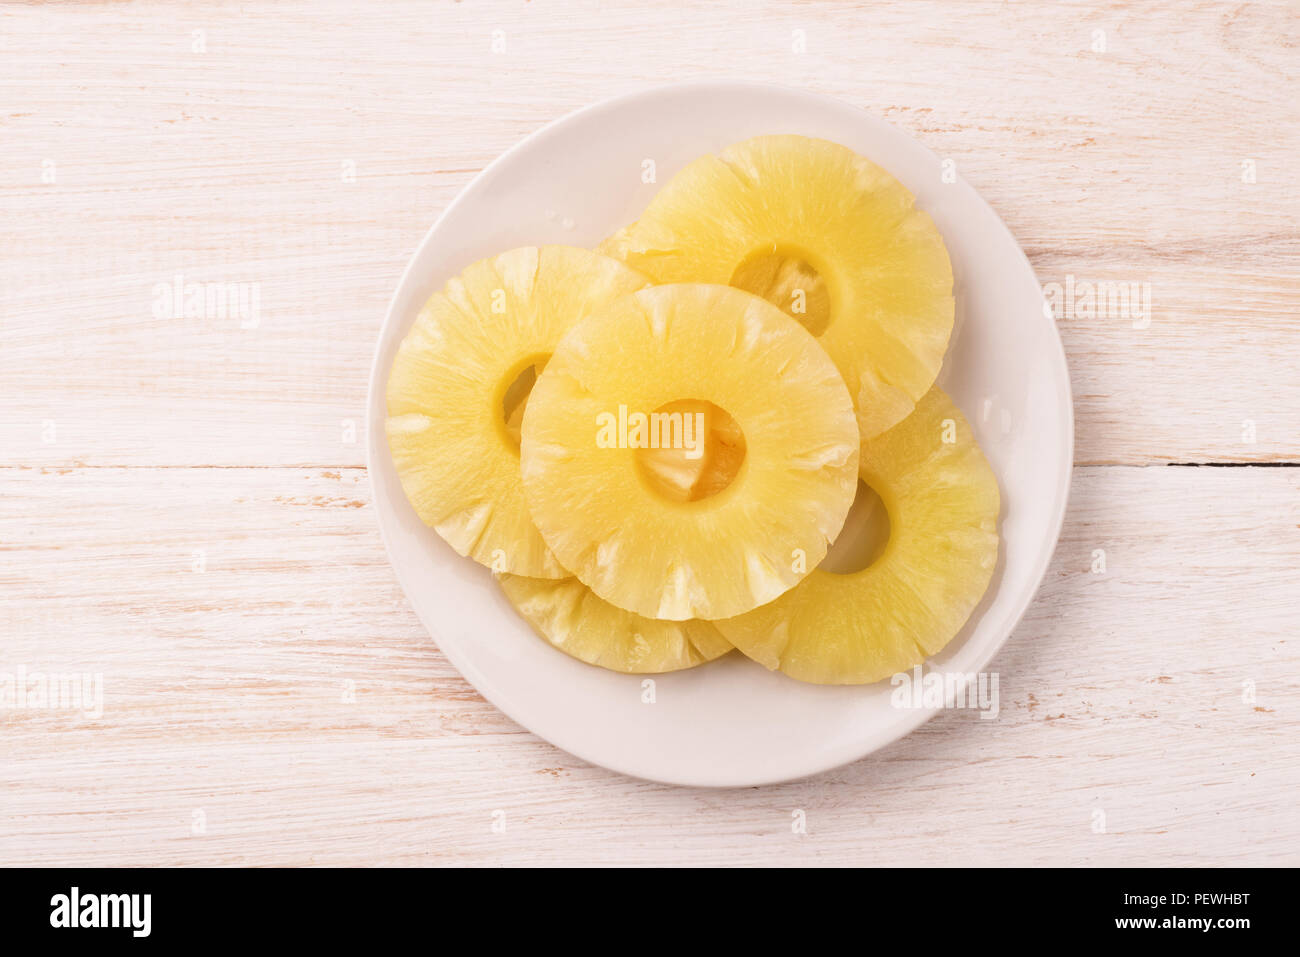 Top view of canned pineapple slices on plate on wooden background Stock Photo